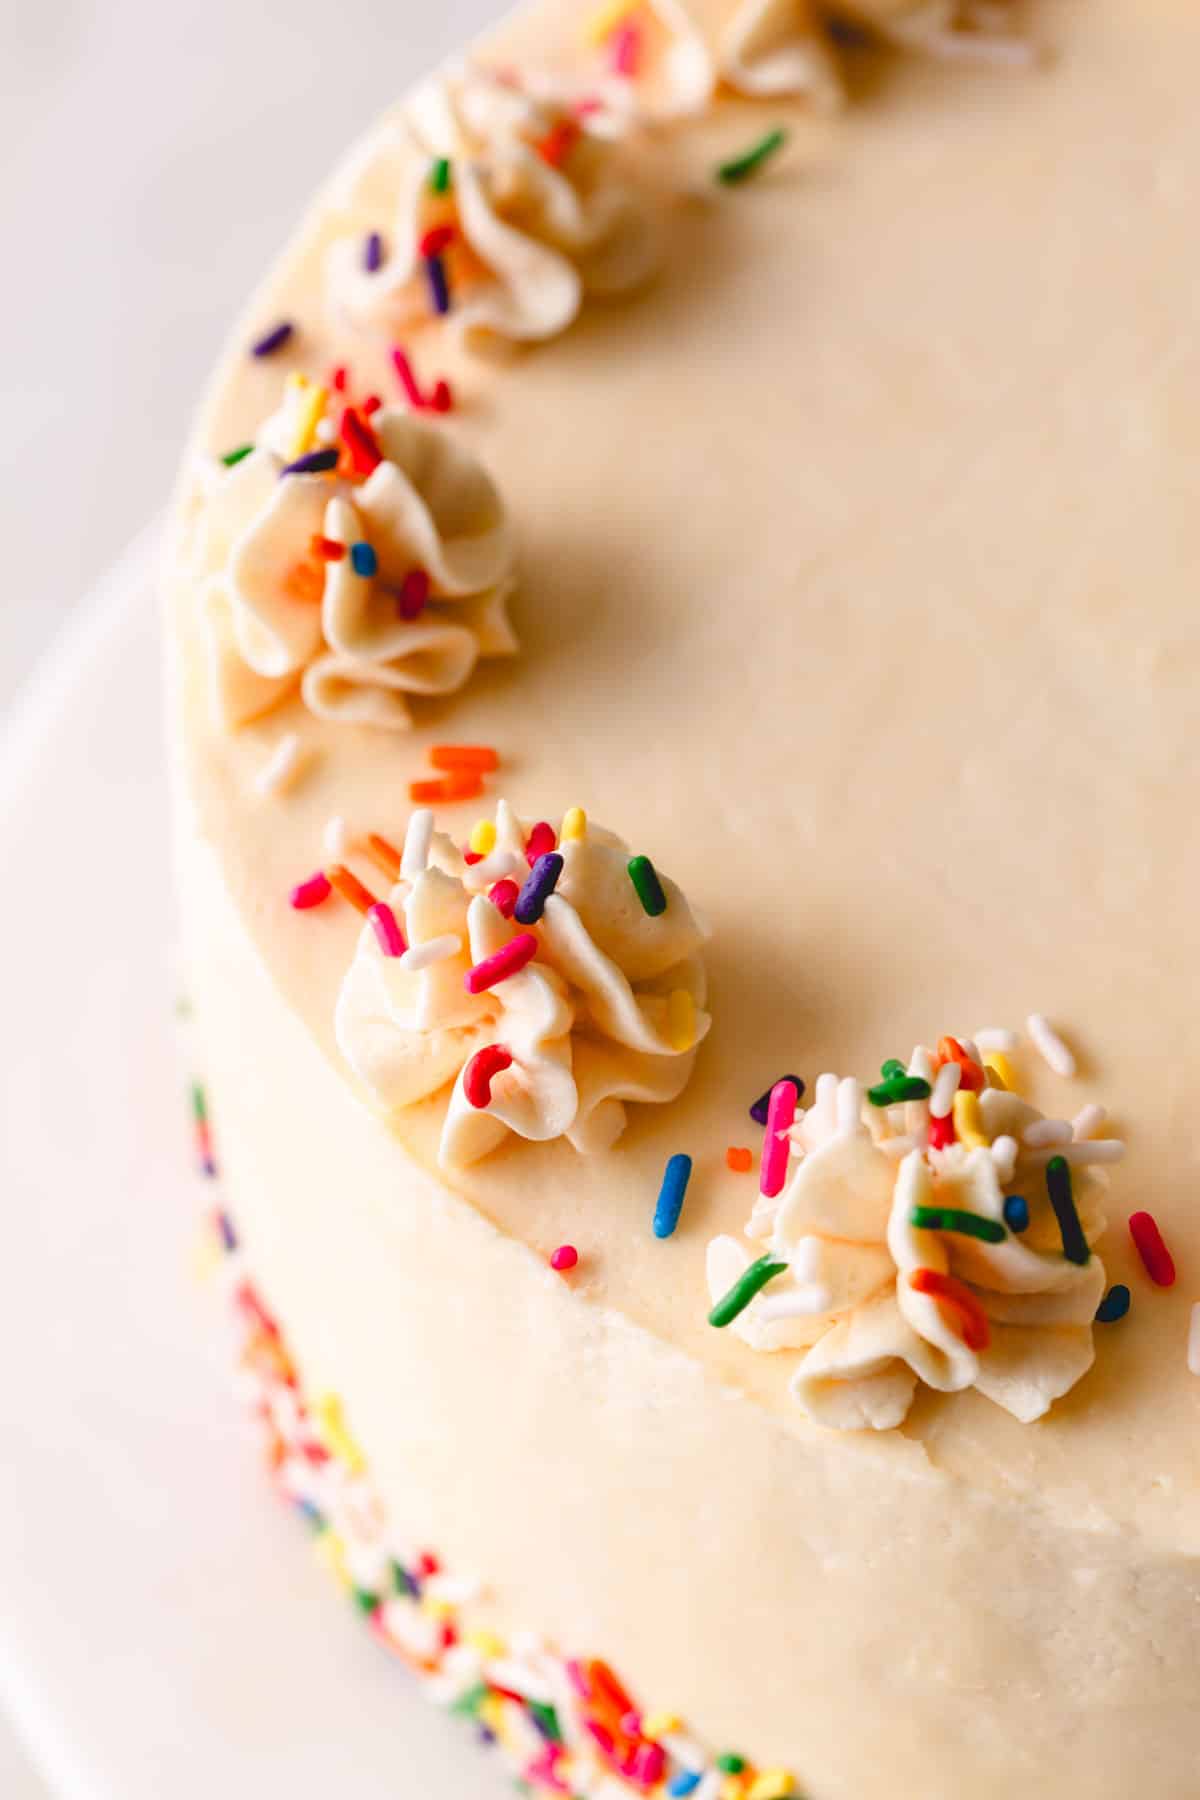 Piped Russian buttercream and sprinkles on a vanilla bean cake.